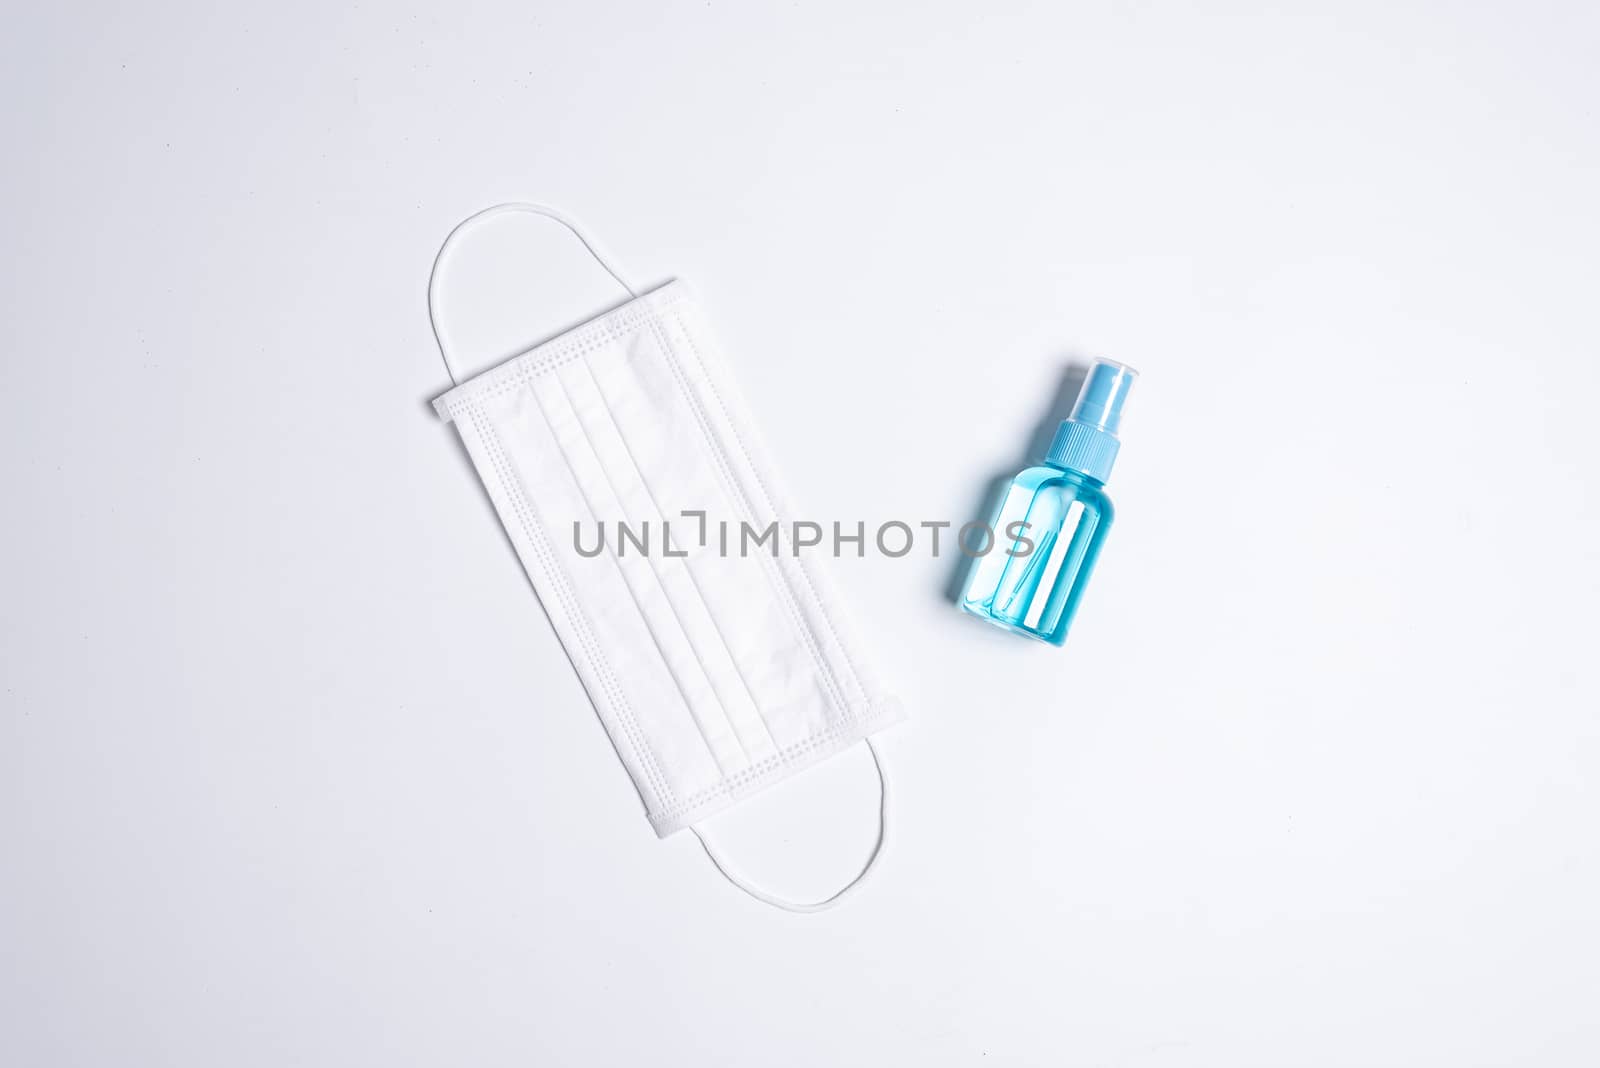 The equipment to protect COVID-19, white mask and hand cleaner gel with Isolated on white background concept.